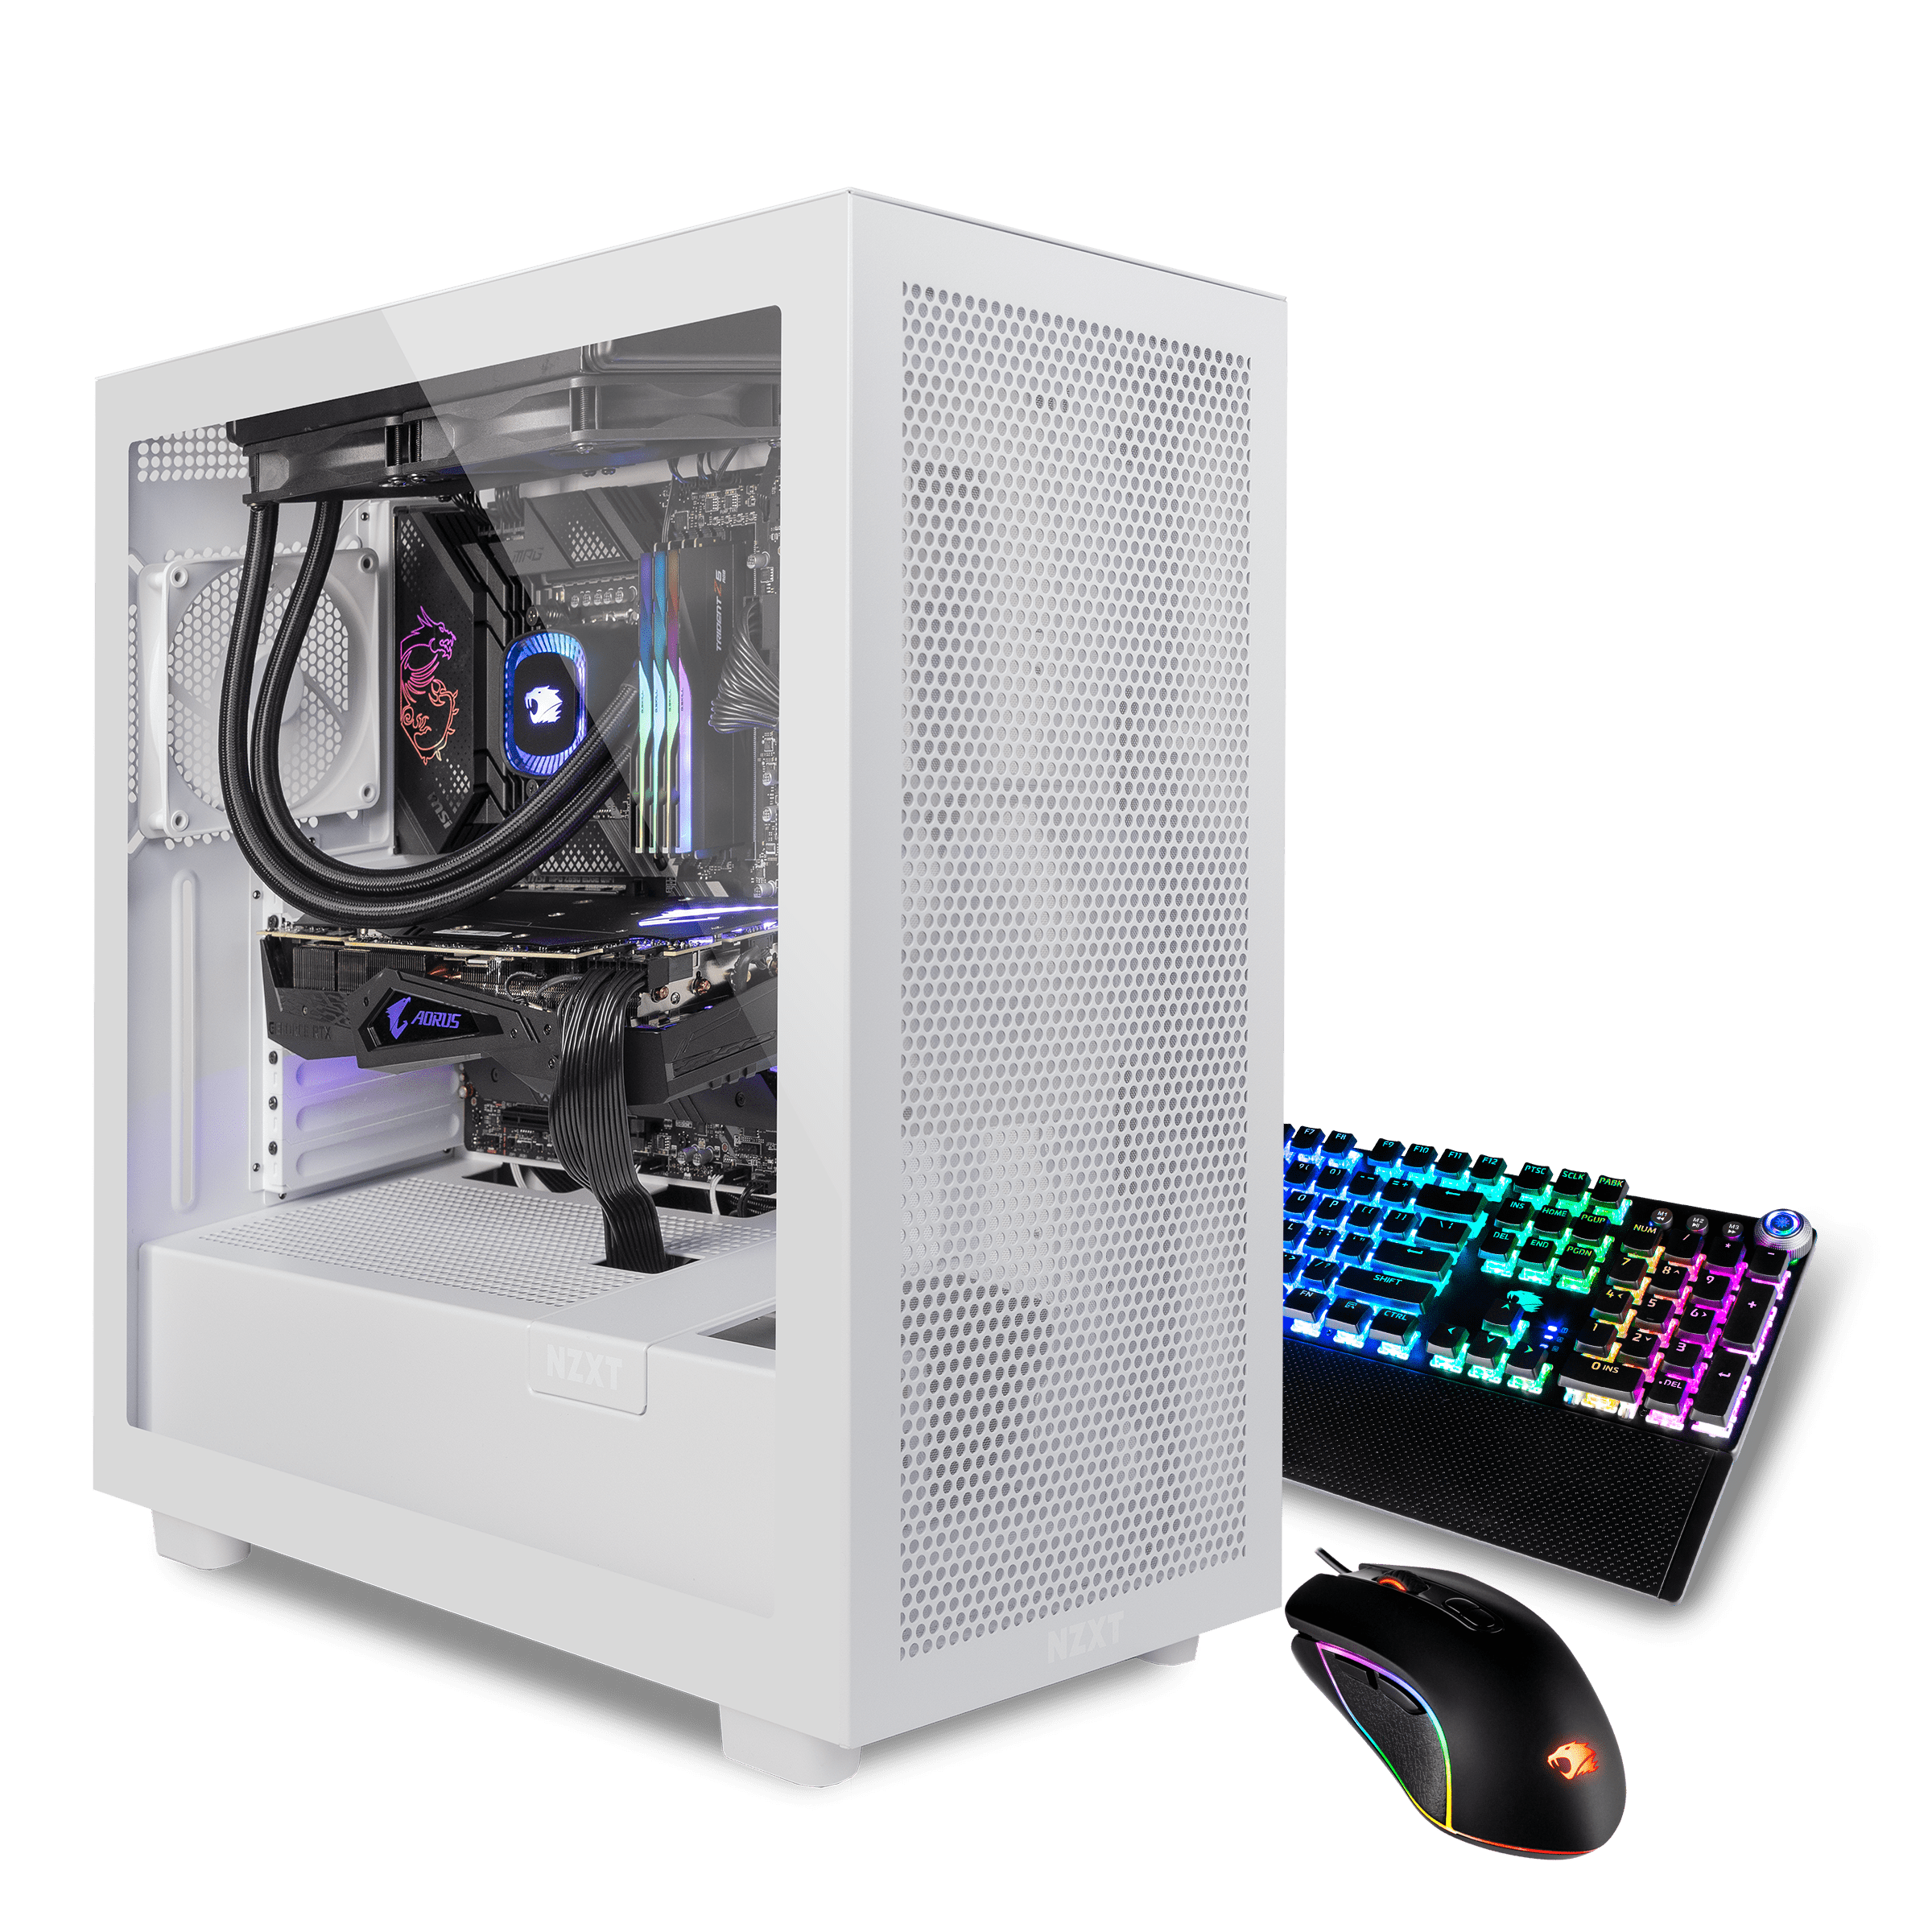 Shop iBUYPOWER for Gaming PCs, Desktops, and More